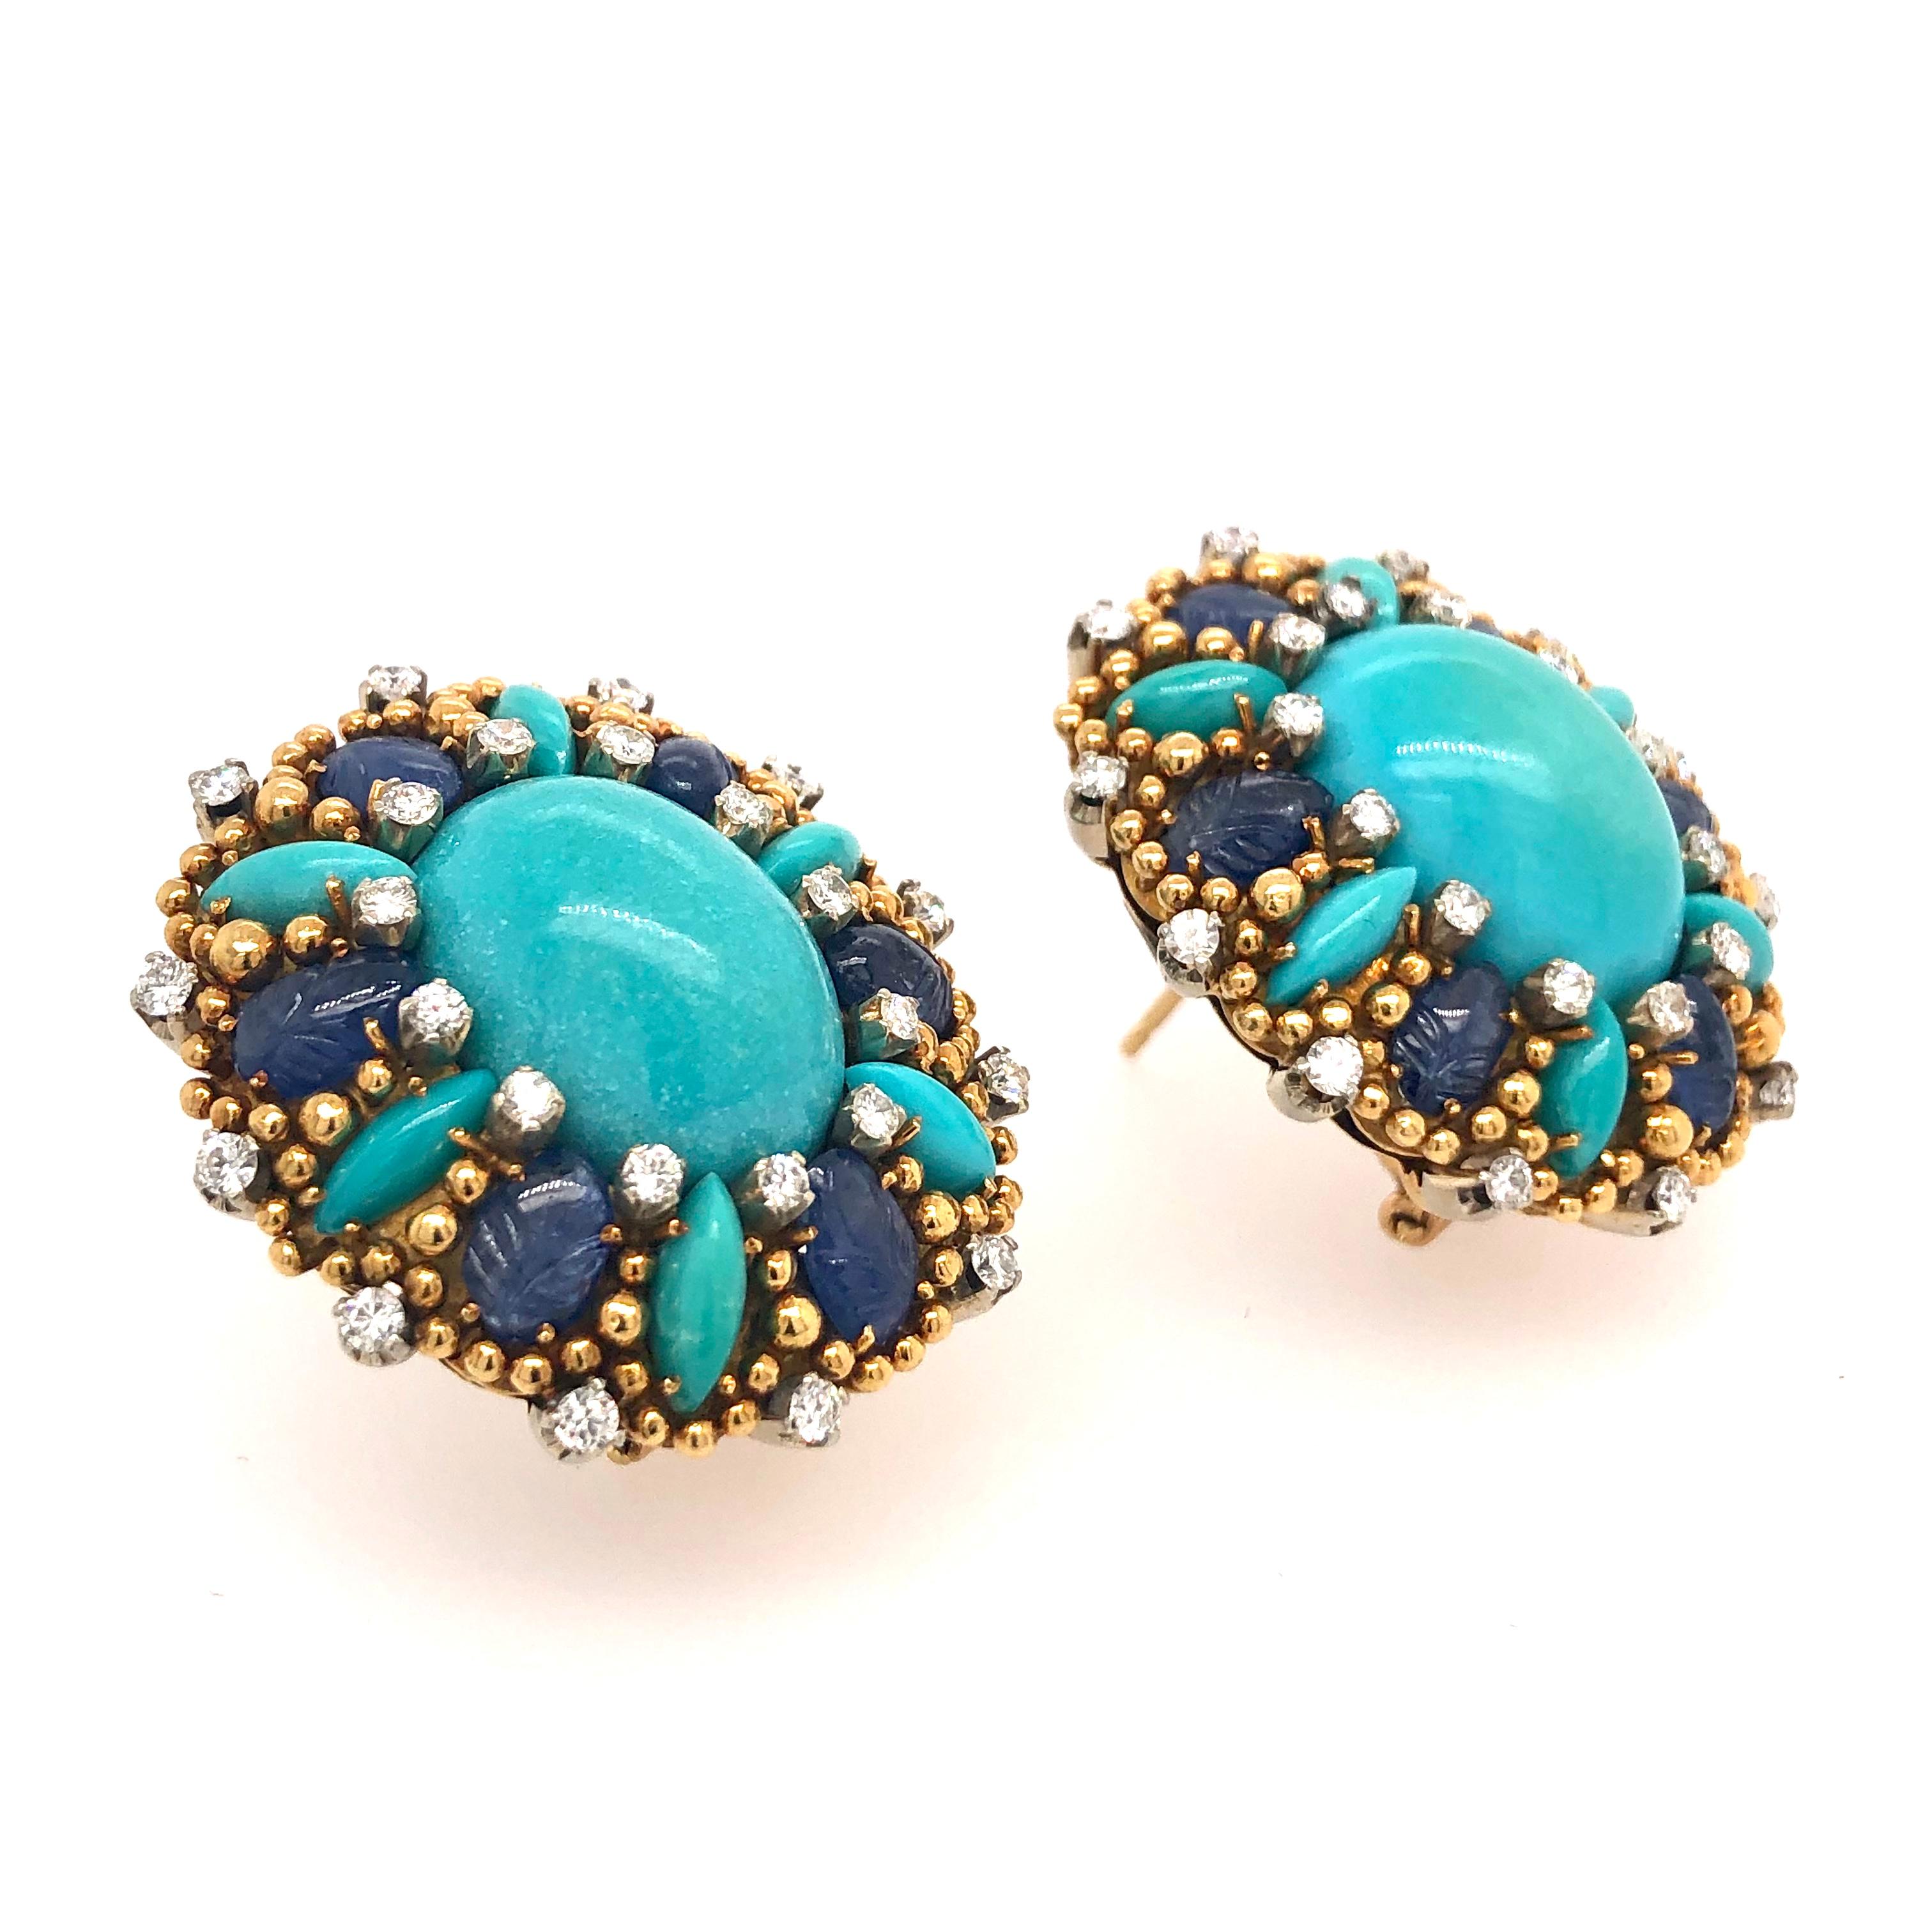 Contemporary Tiffany & Co. Turquoise Sapphire and Diamond Yellow Gold Earrings